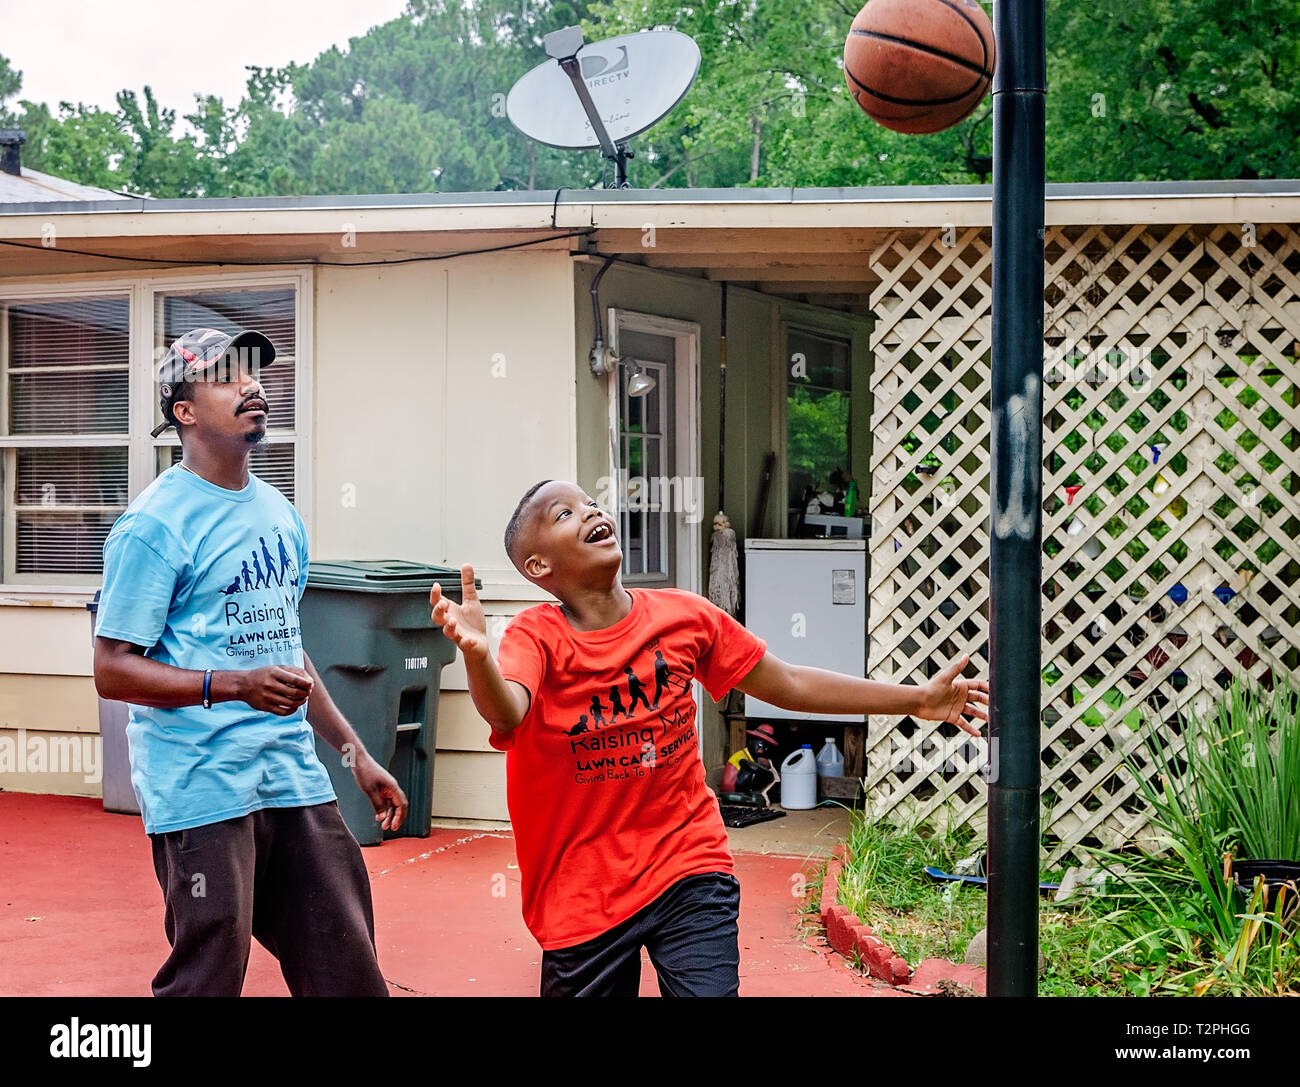 Rodney Smith Jr. watches as Quay Knight makes a basket, Aug. 1, 2018, in Huntsville, Alabama. Stock Photo